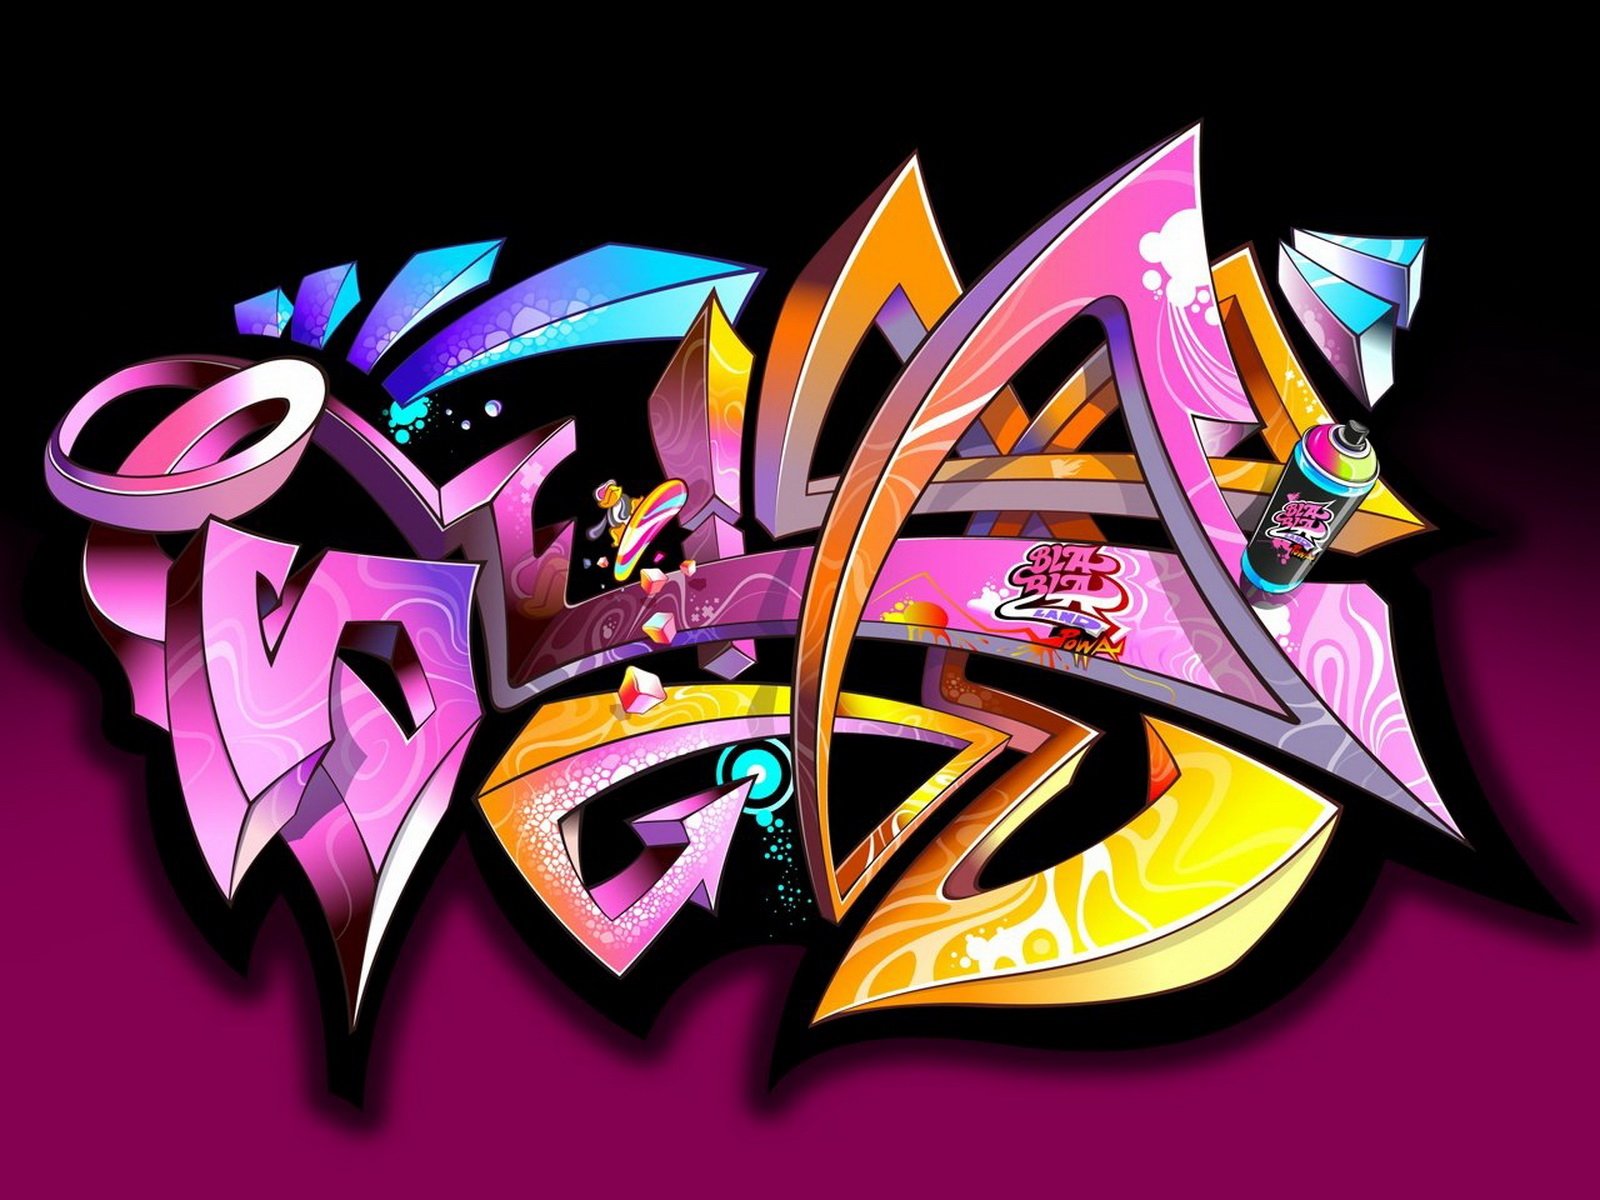 graffiti backgrounds graffiti backgrounds graffiti backgrounds